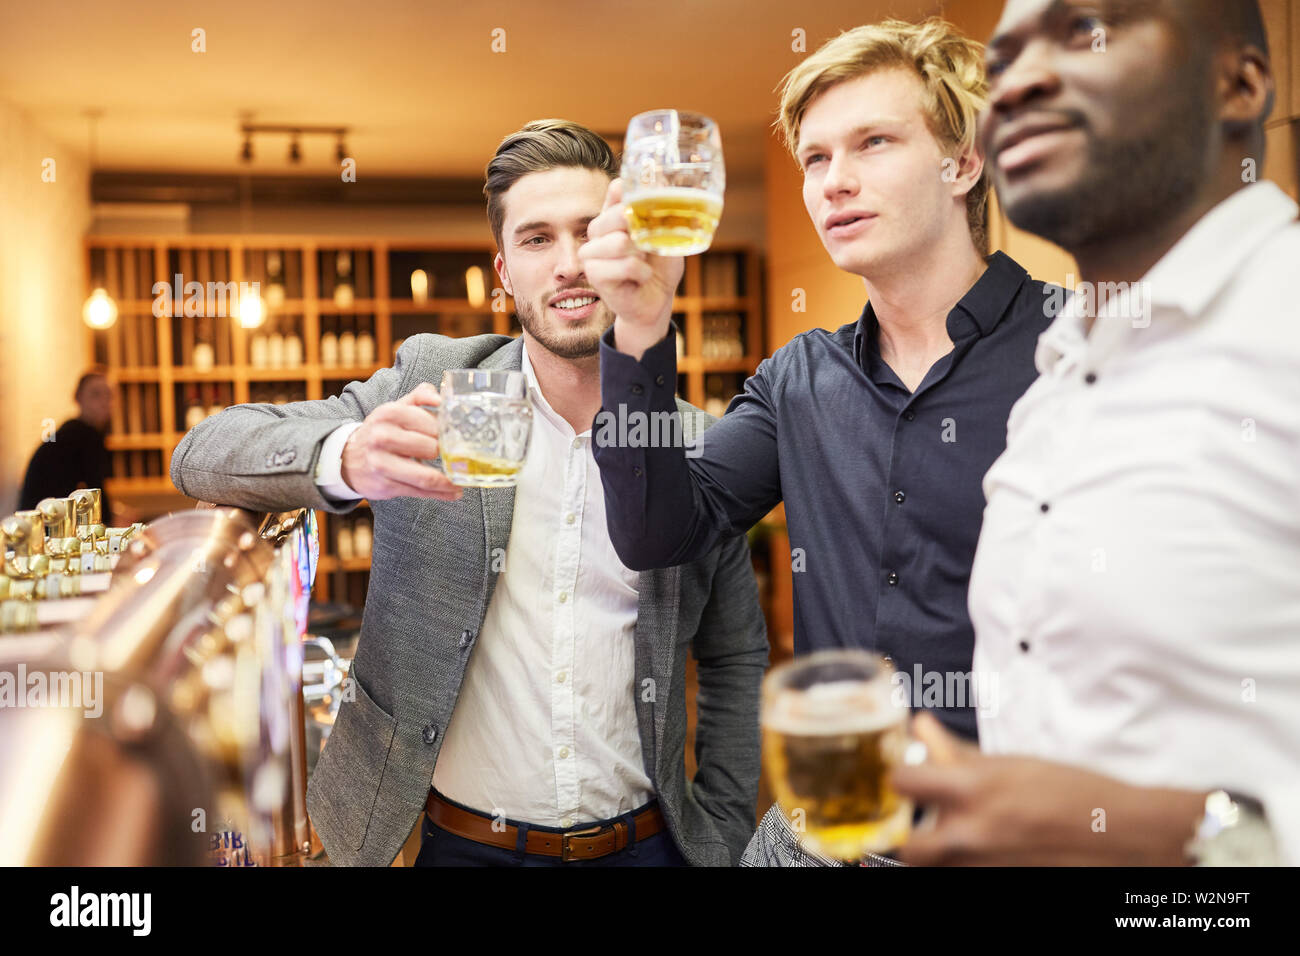 Men as friends and mates while drinking beer together in the pub at the bar Stock Photo